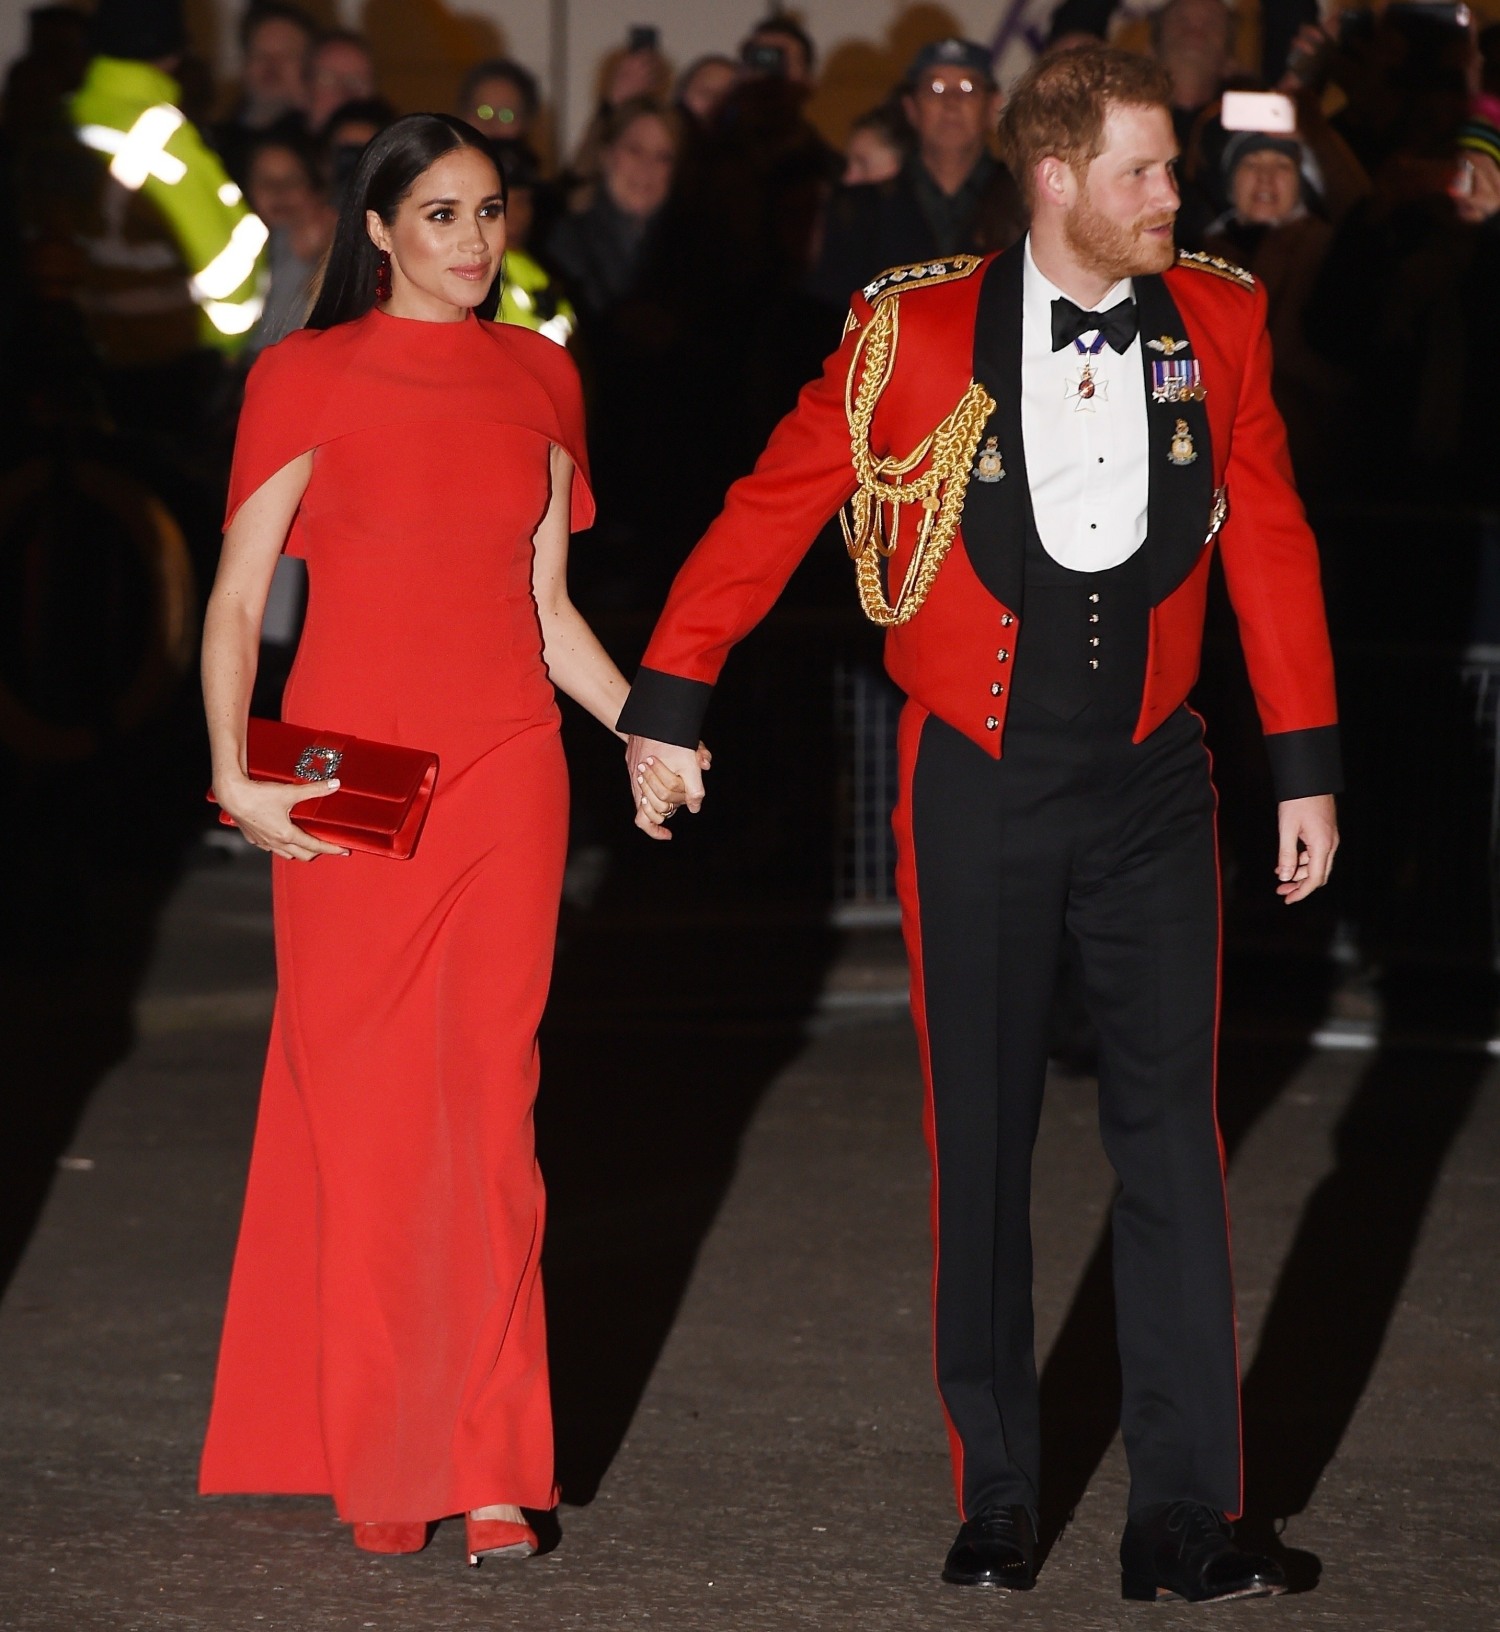 Prince Harry, The Duke of Sussex and Meghan, Duchess of Sussex arrives at The Mountbatten Festival of Music